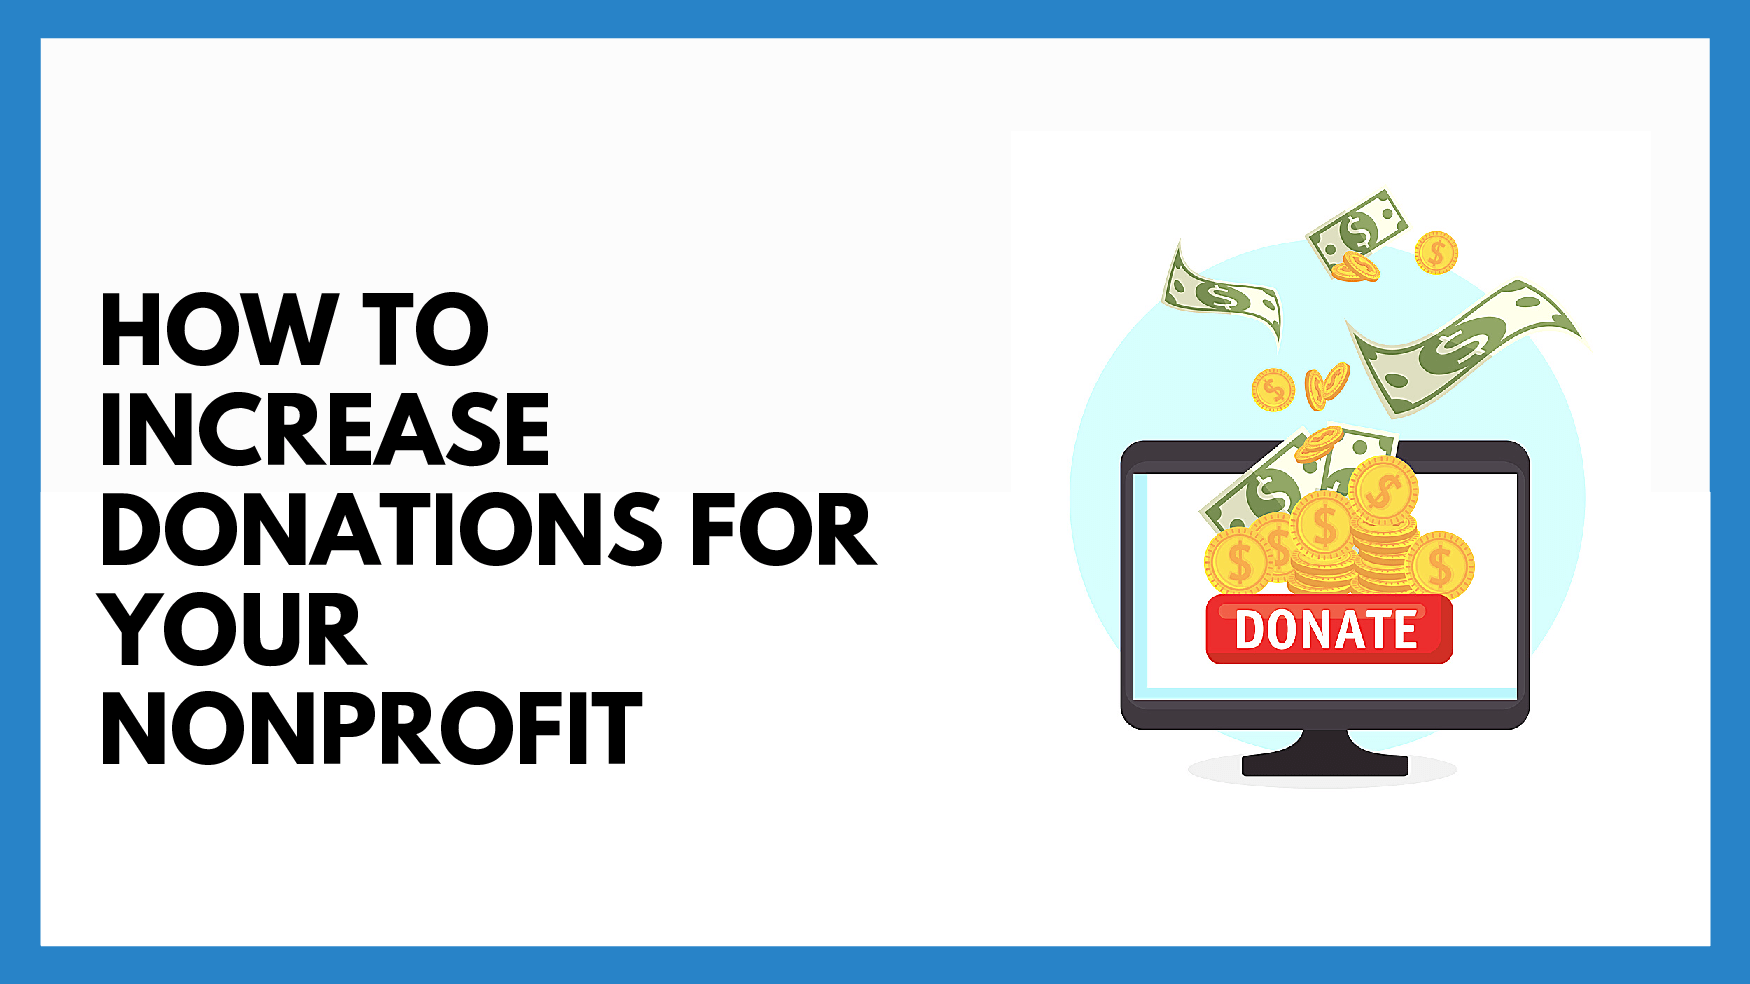 How to Increase Donations for your Nonprofit